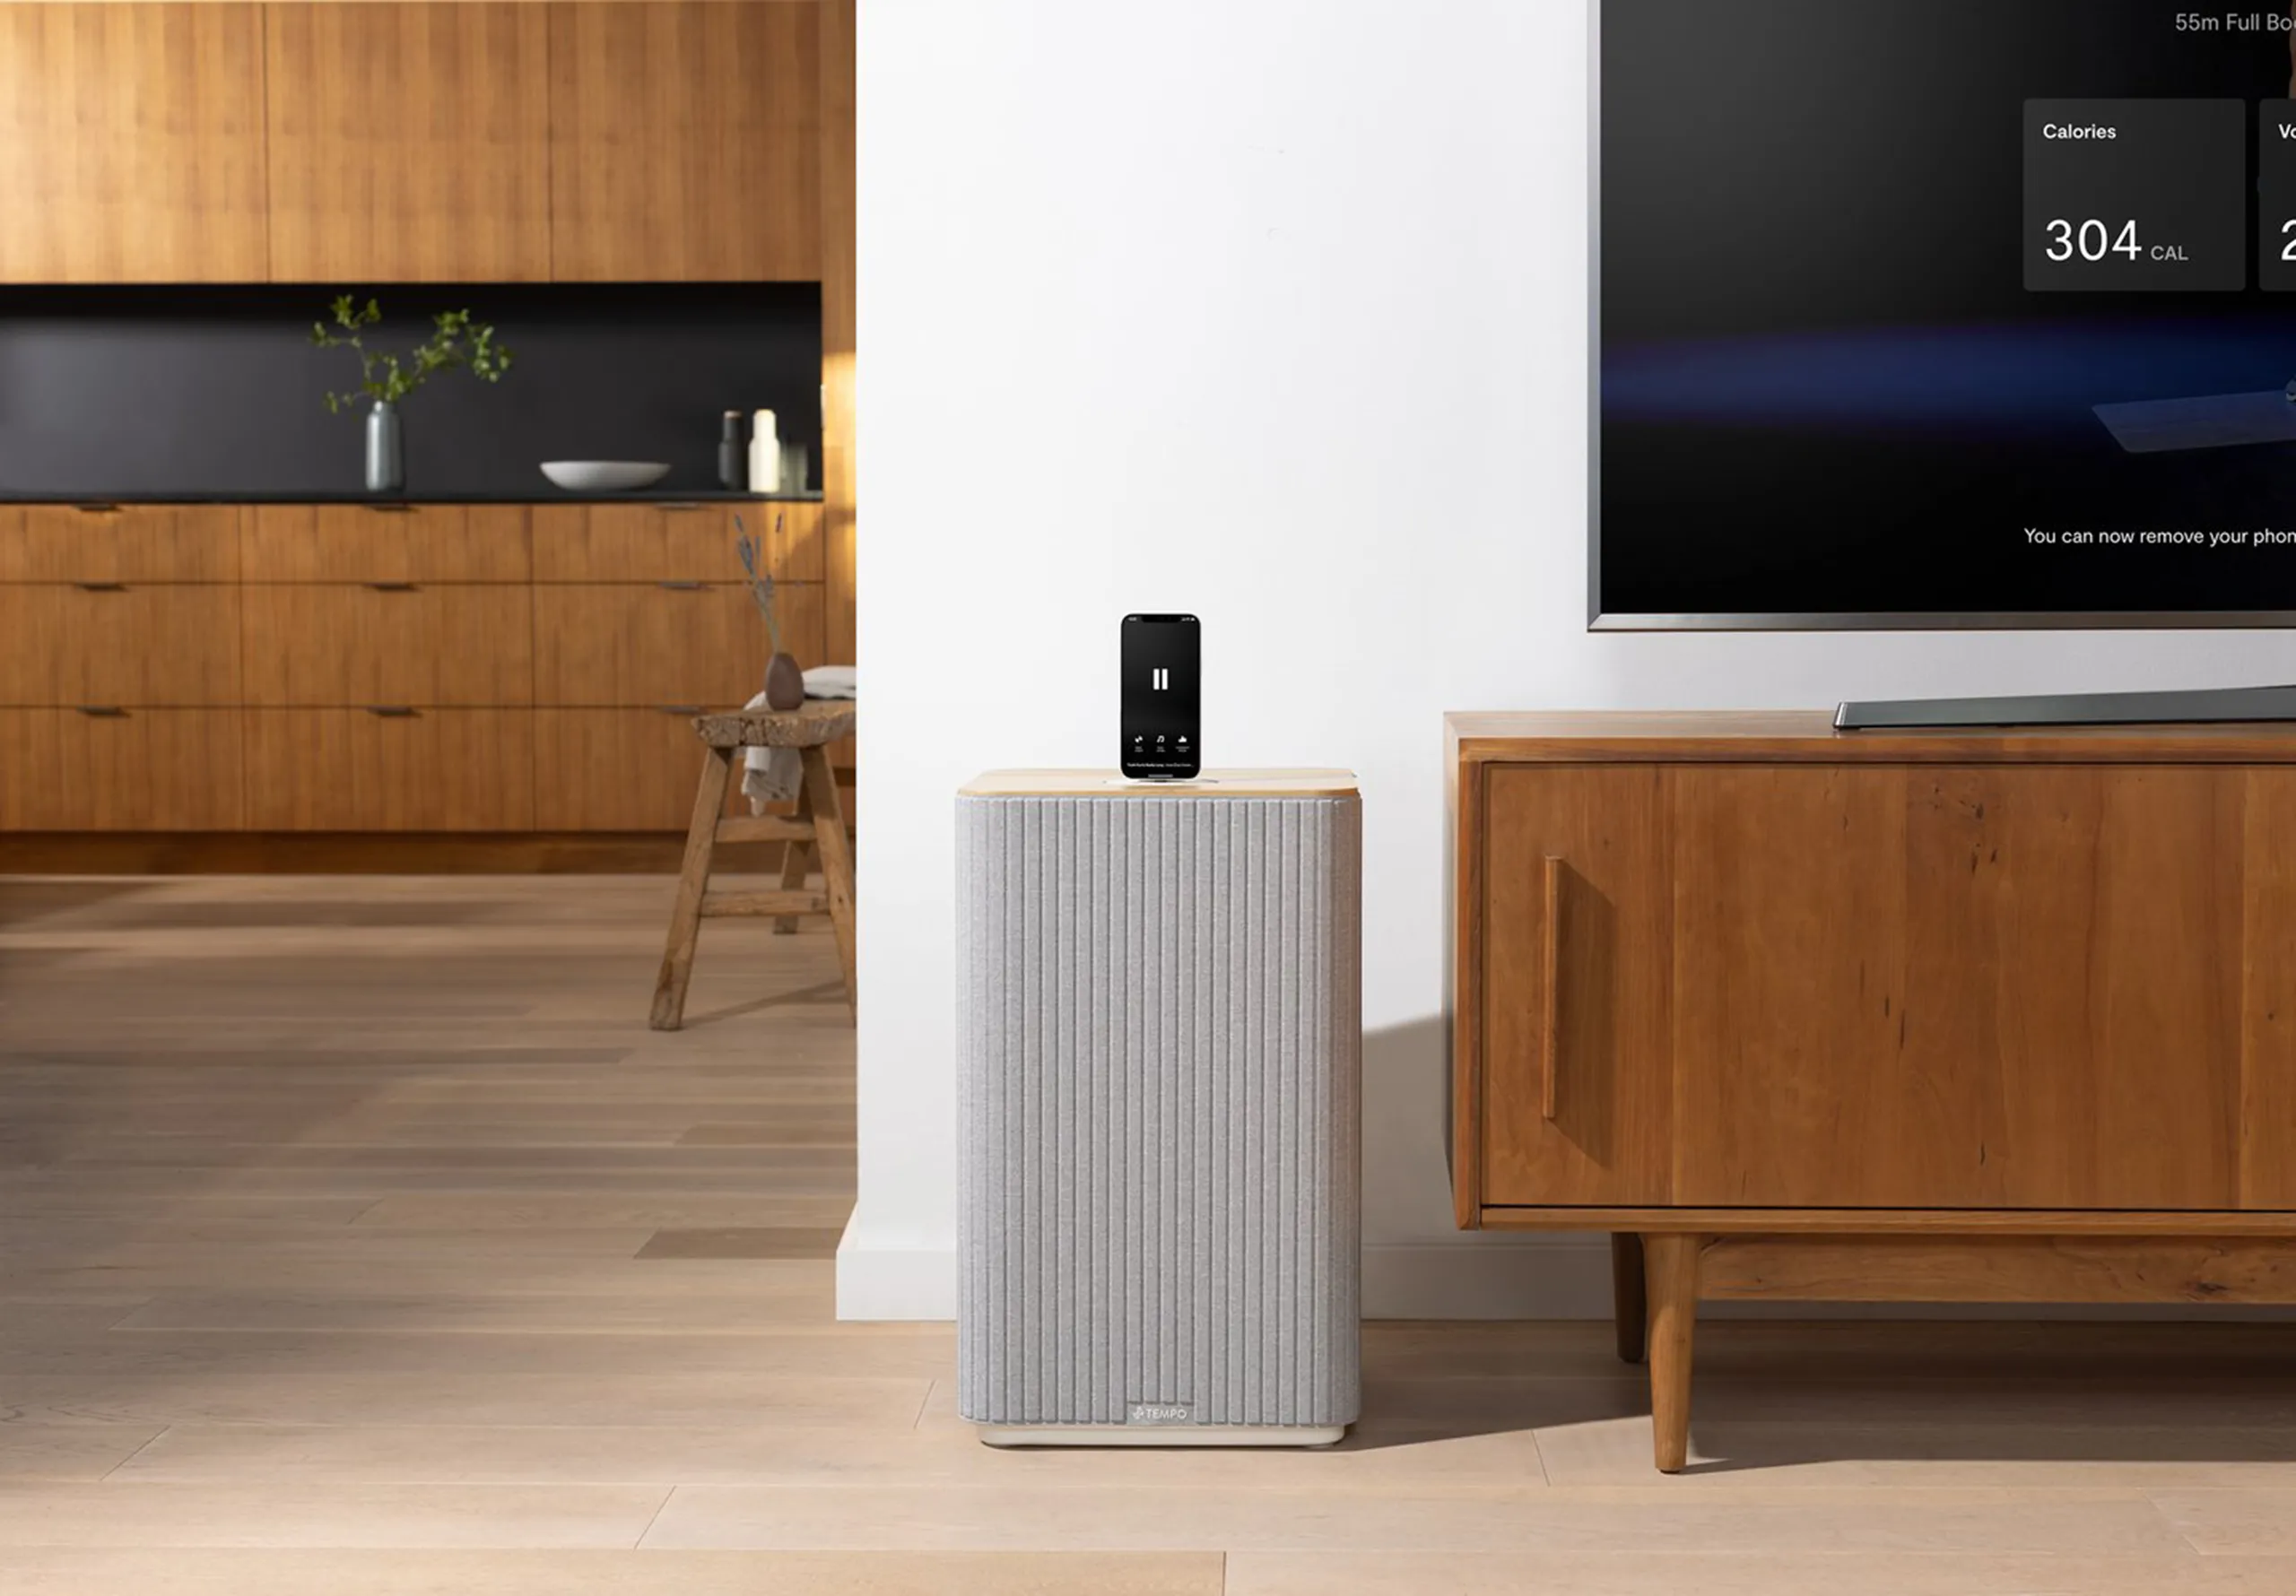 Tempo speaker in lifestyle environment featured by Rodd